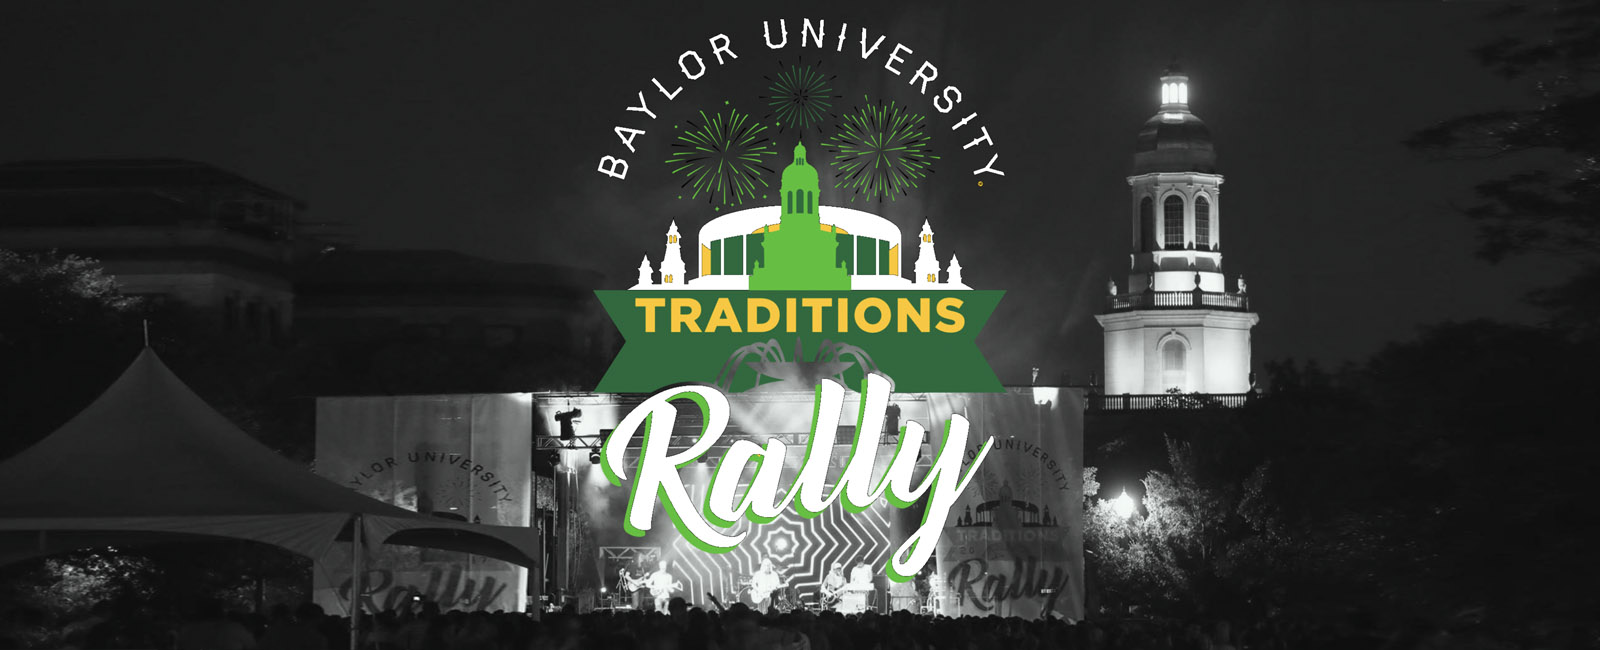 Traditions Rally graphic